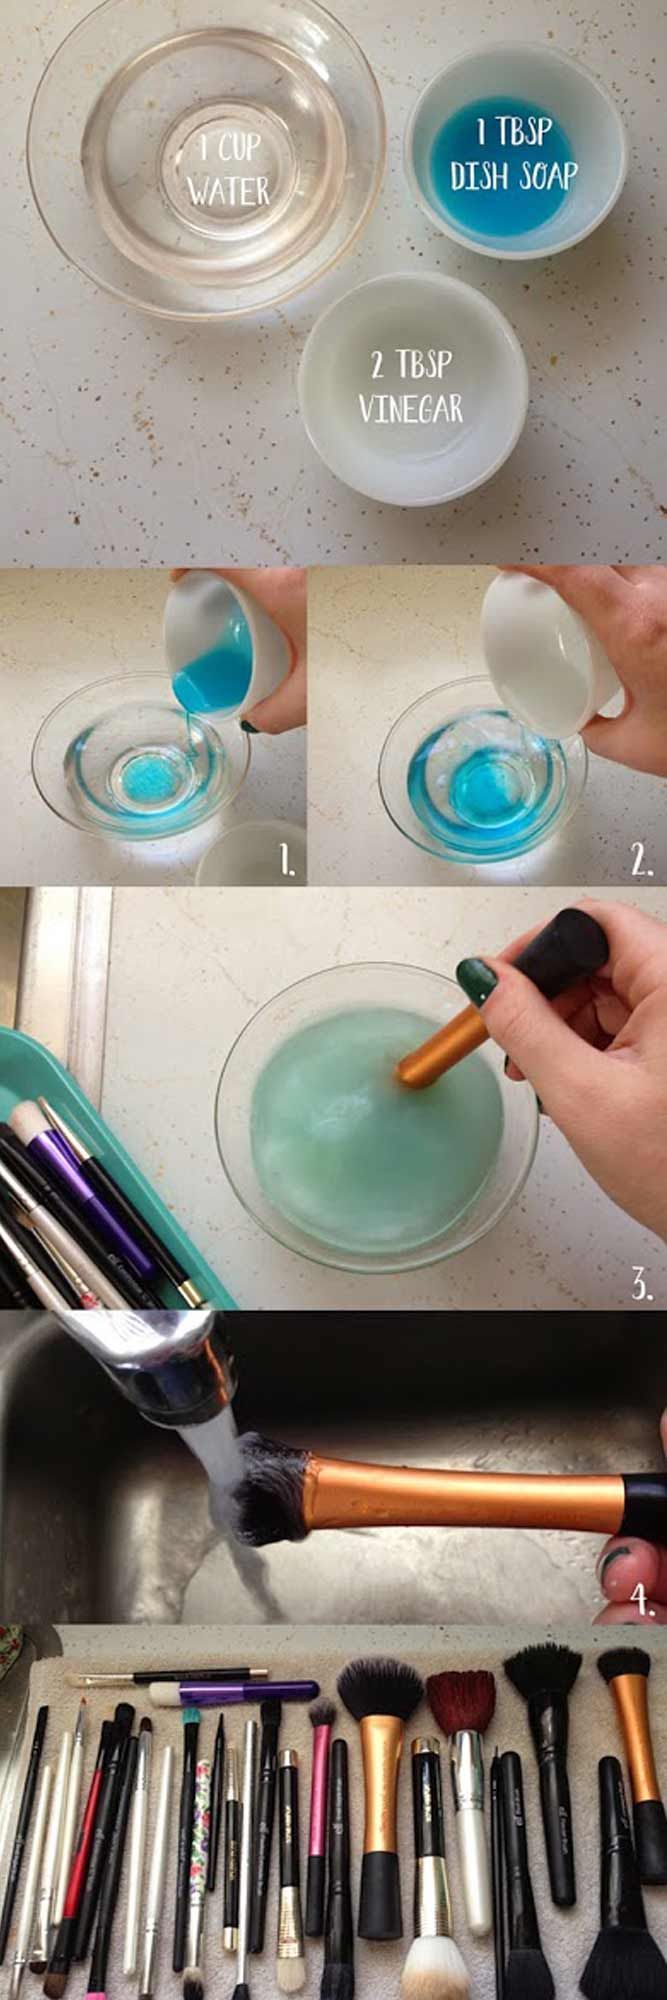 How to Clean Your Makeup Brushes Weekly -   17 hairstyles DIY makeup tips ideas